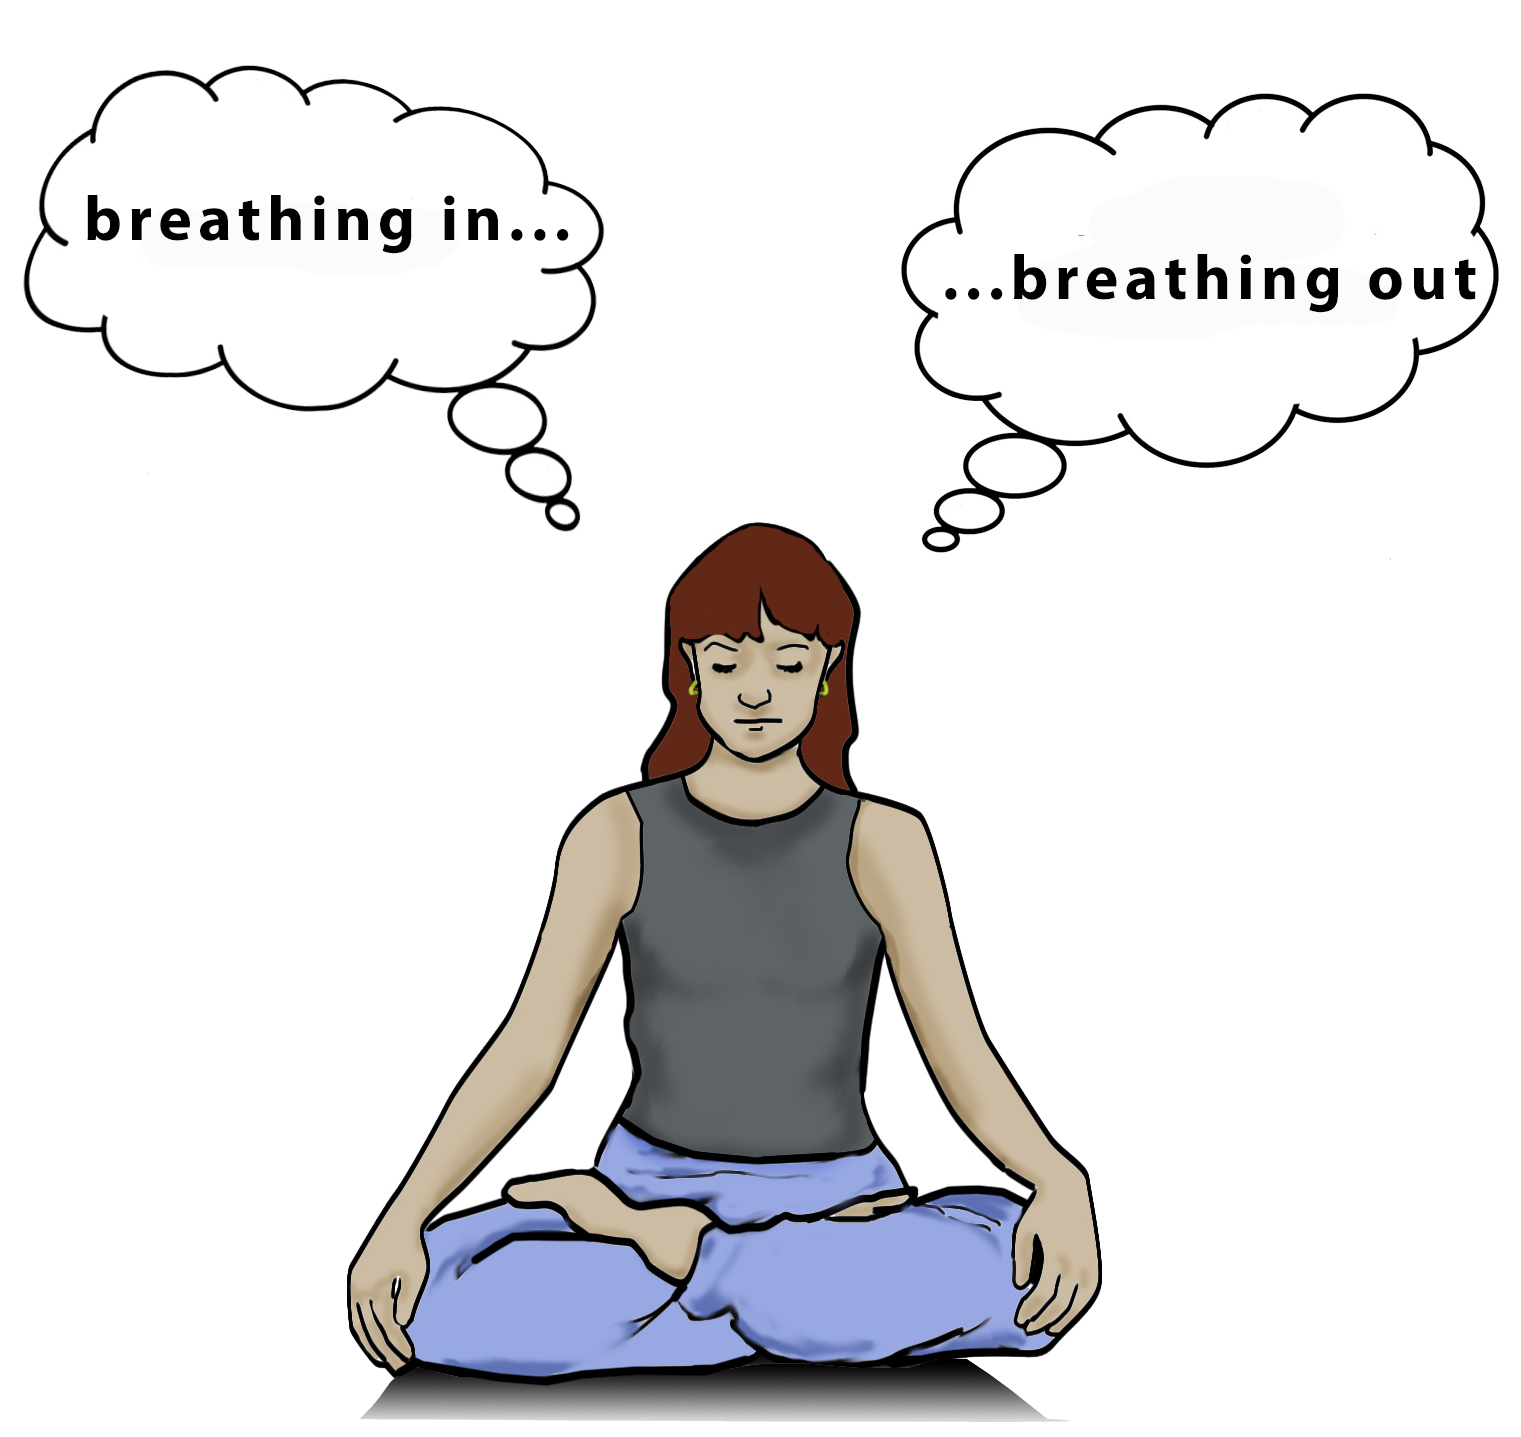 Illustration of a woman meditating, with thought bubble that say breathing in and breathing out